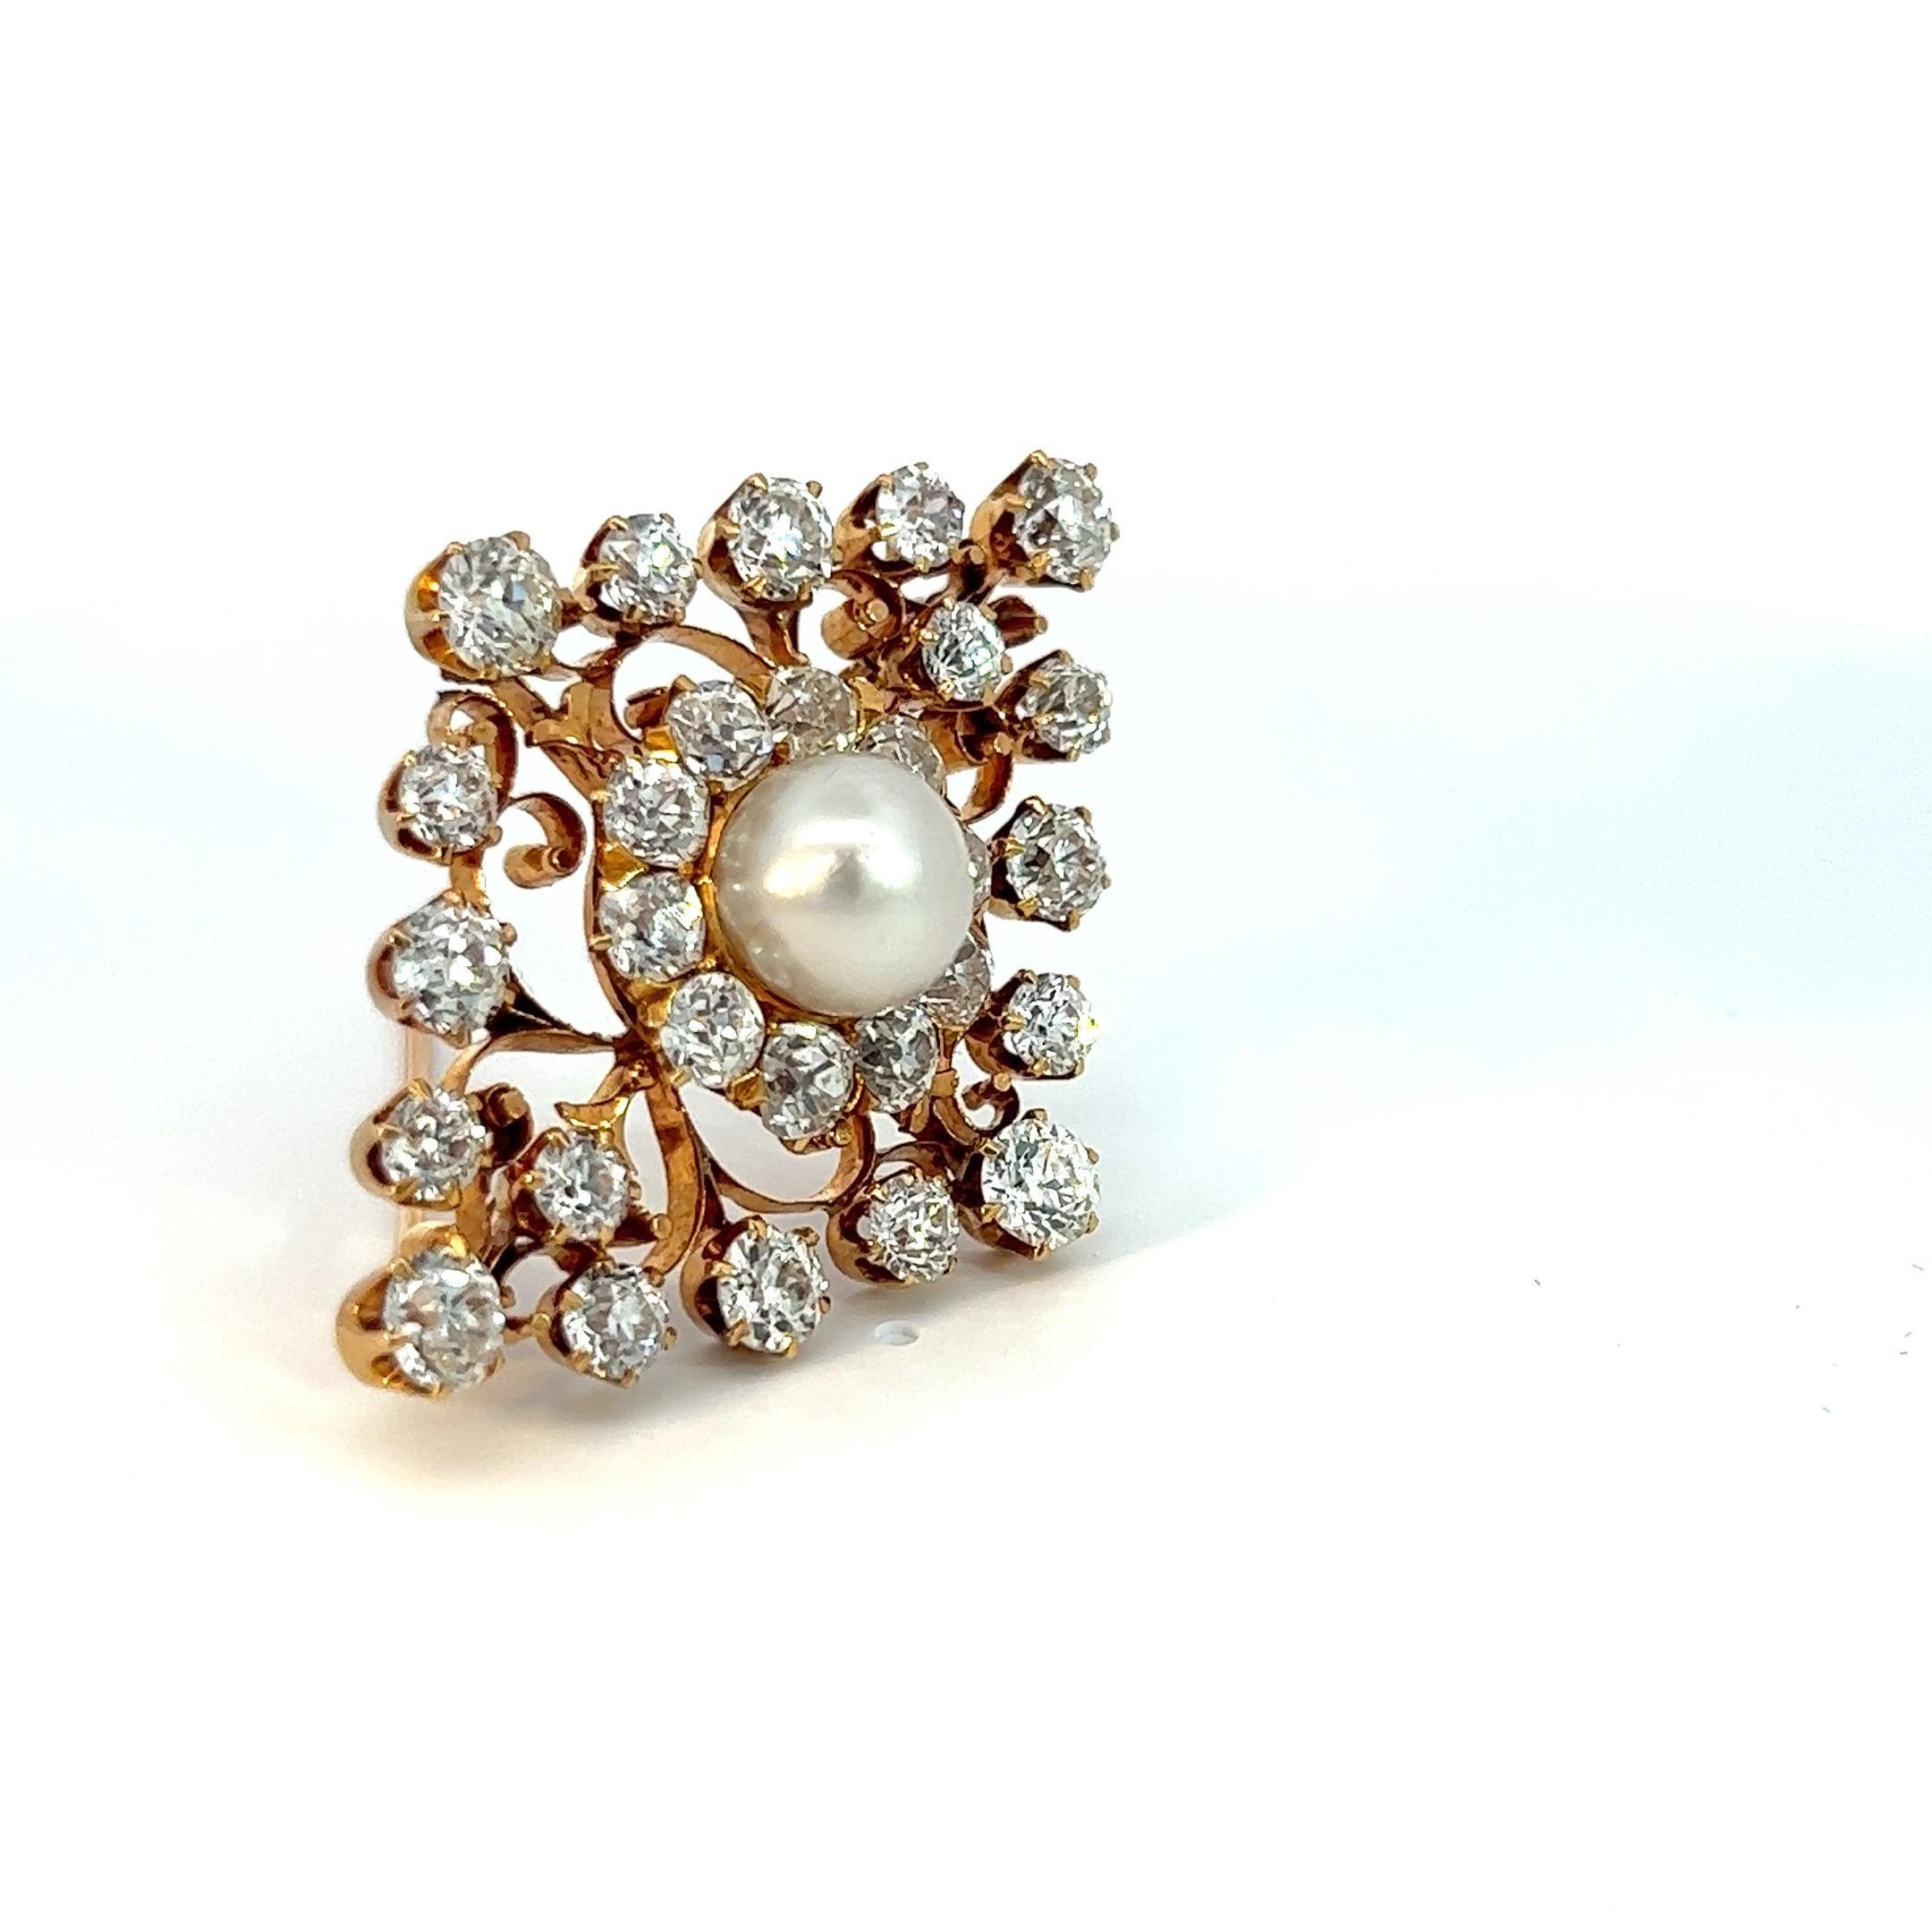 Elevate your style with our Natural Pearl and Old European Cut Diamond Pin, a true embodiment of vintage glamour and sophistication. This exquisite accessory features a luminous Natural Saltwater Pearl accompanied by a breathtaking arrangement of